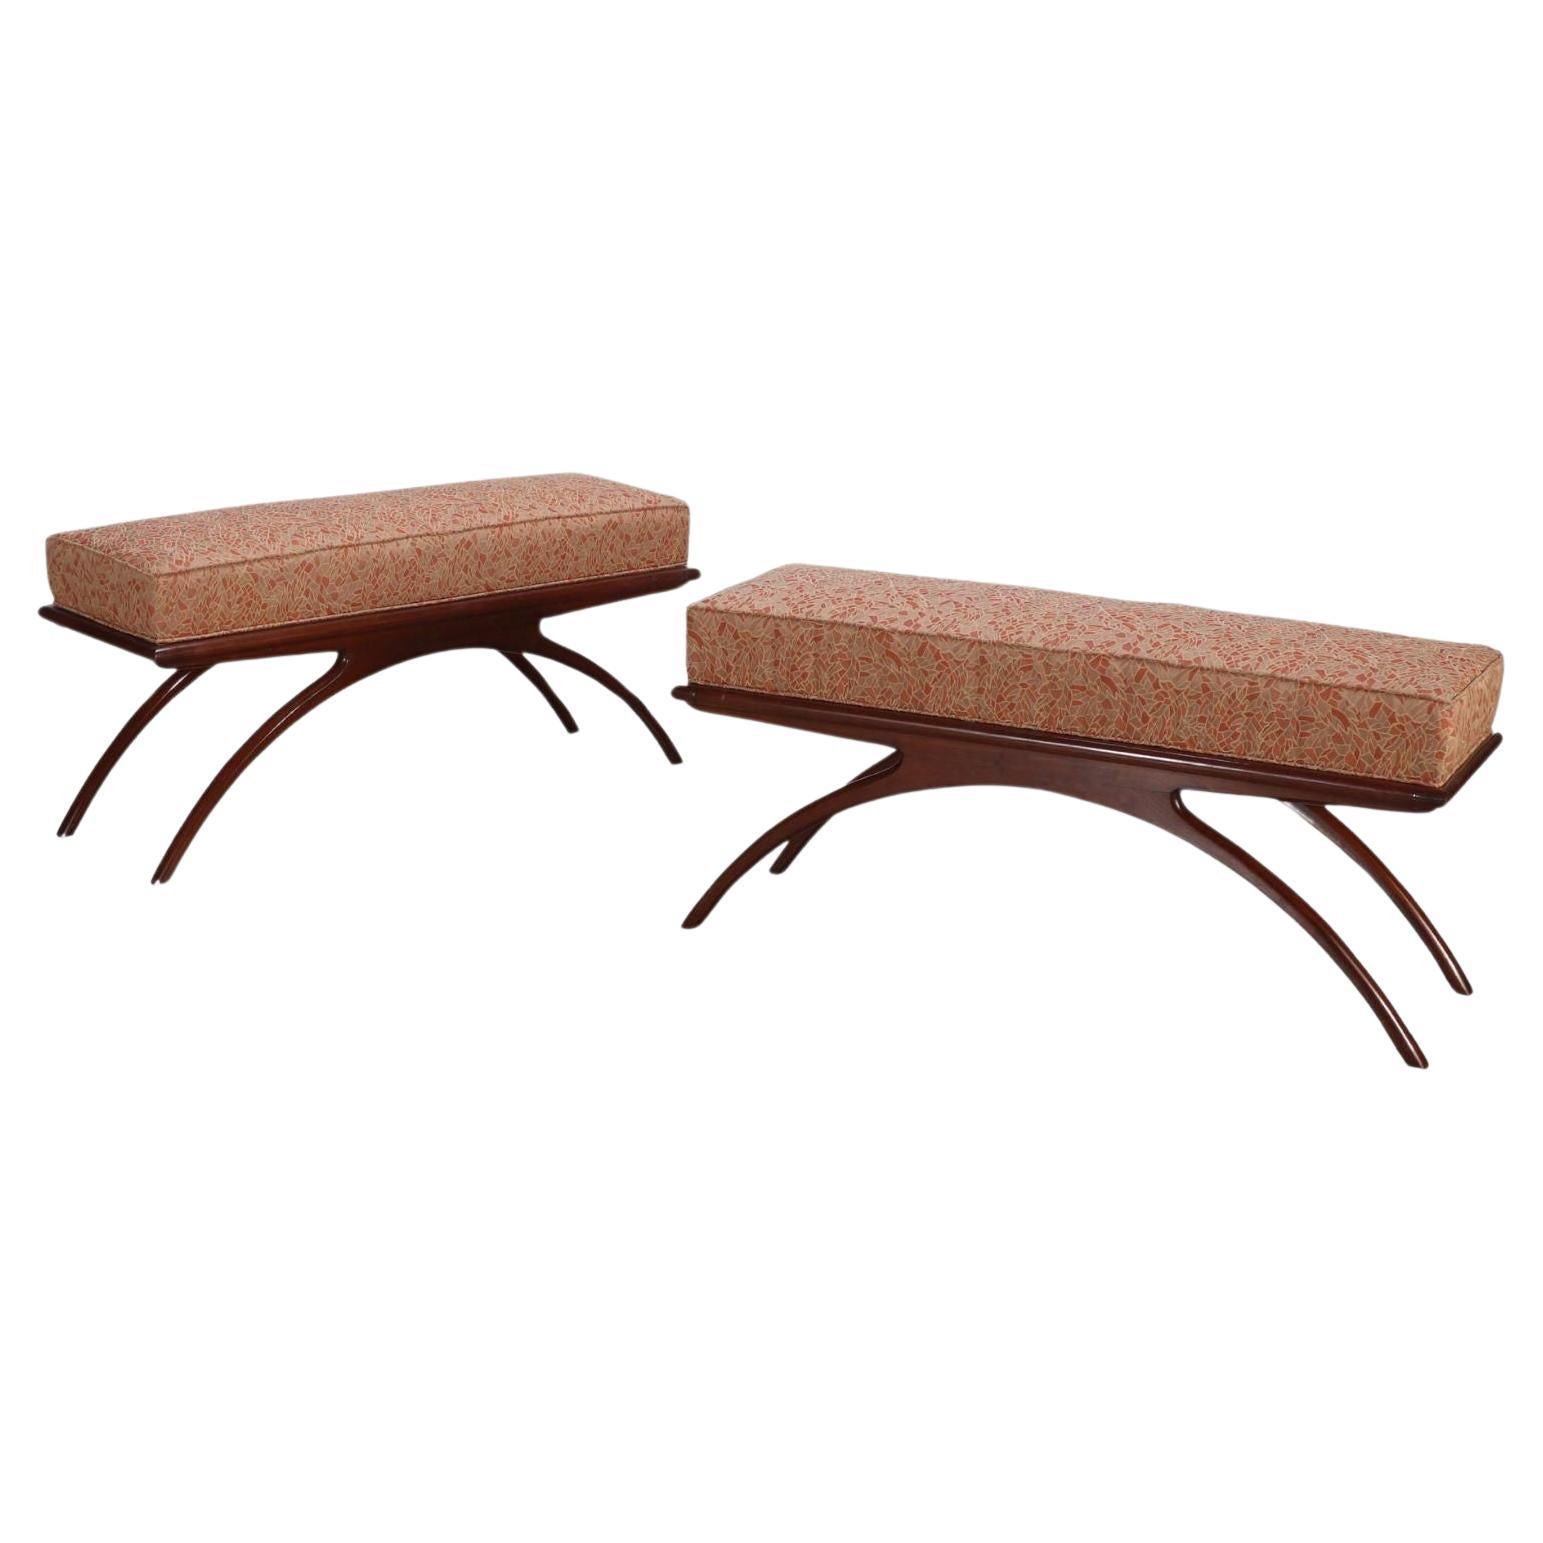 Pair of Arc Benches with Red Abstract Fabric Design For Sale